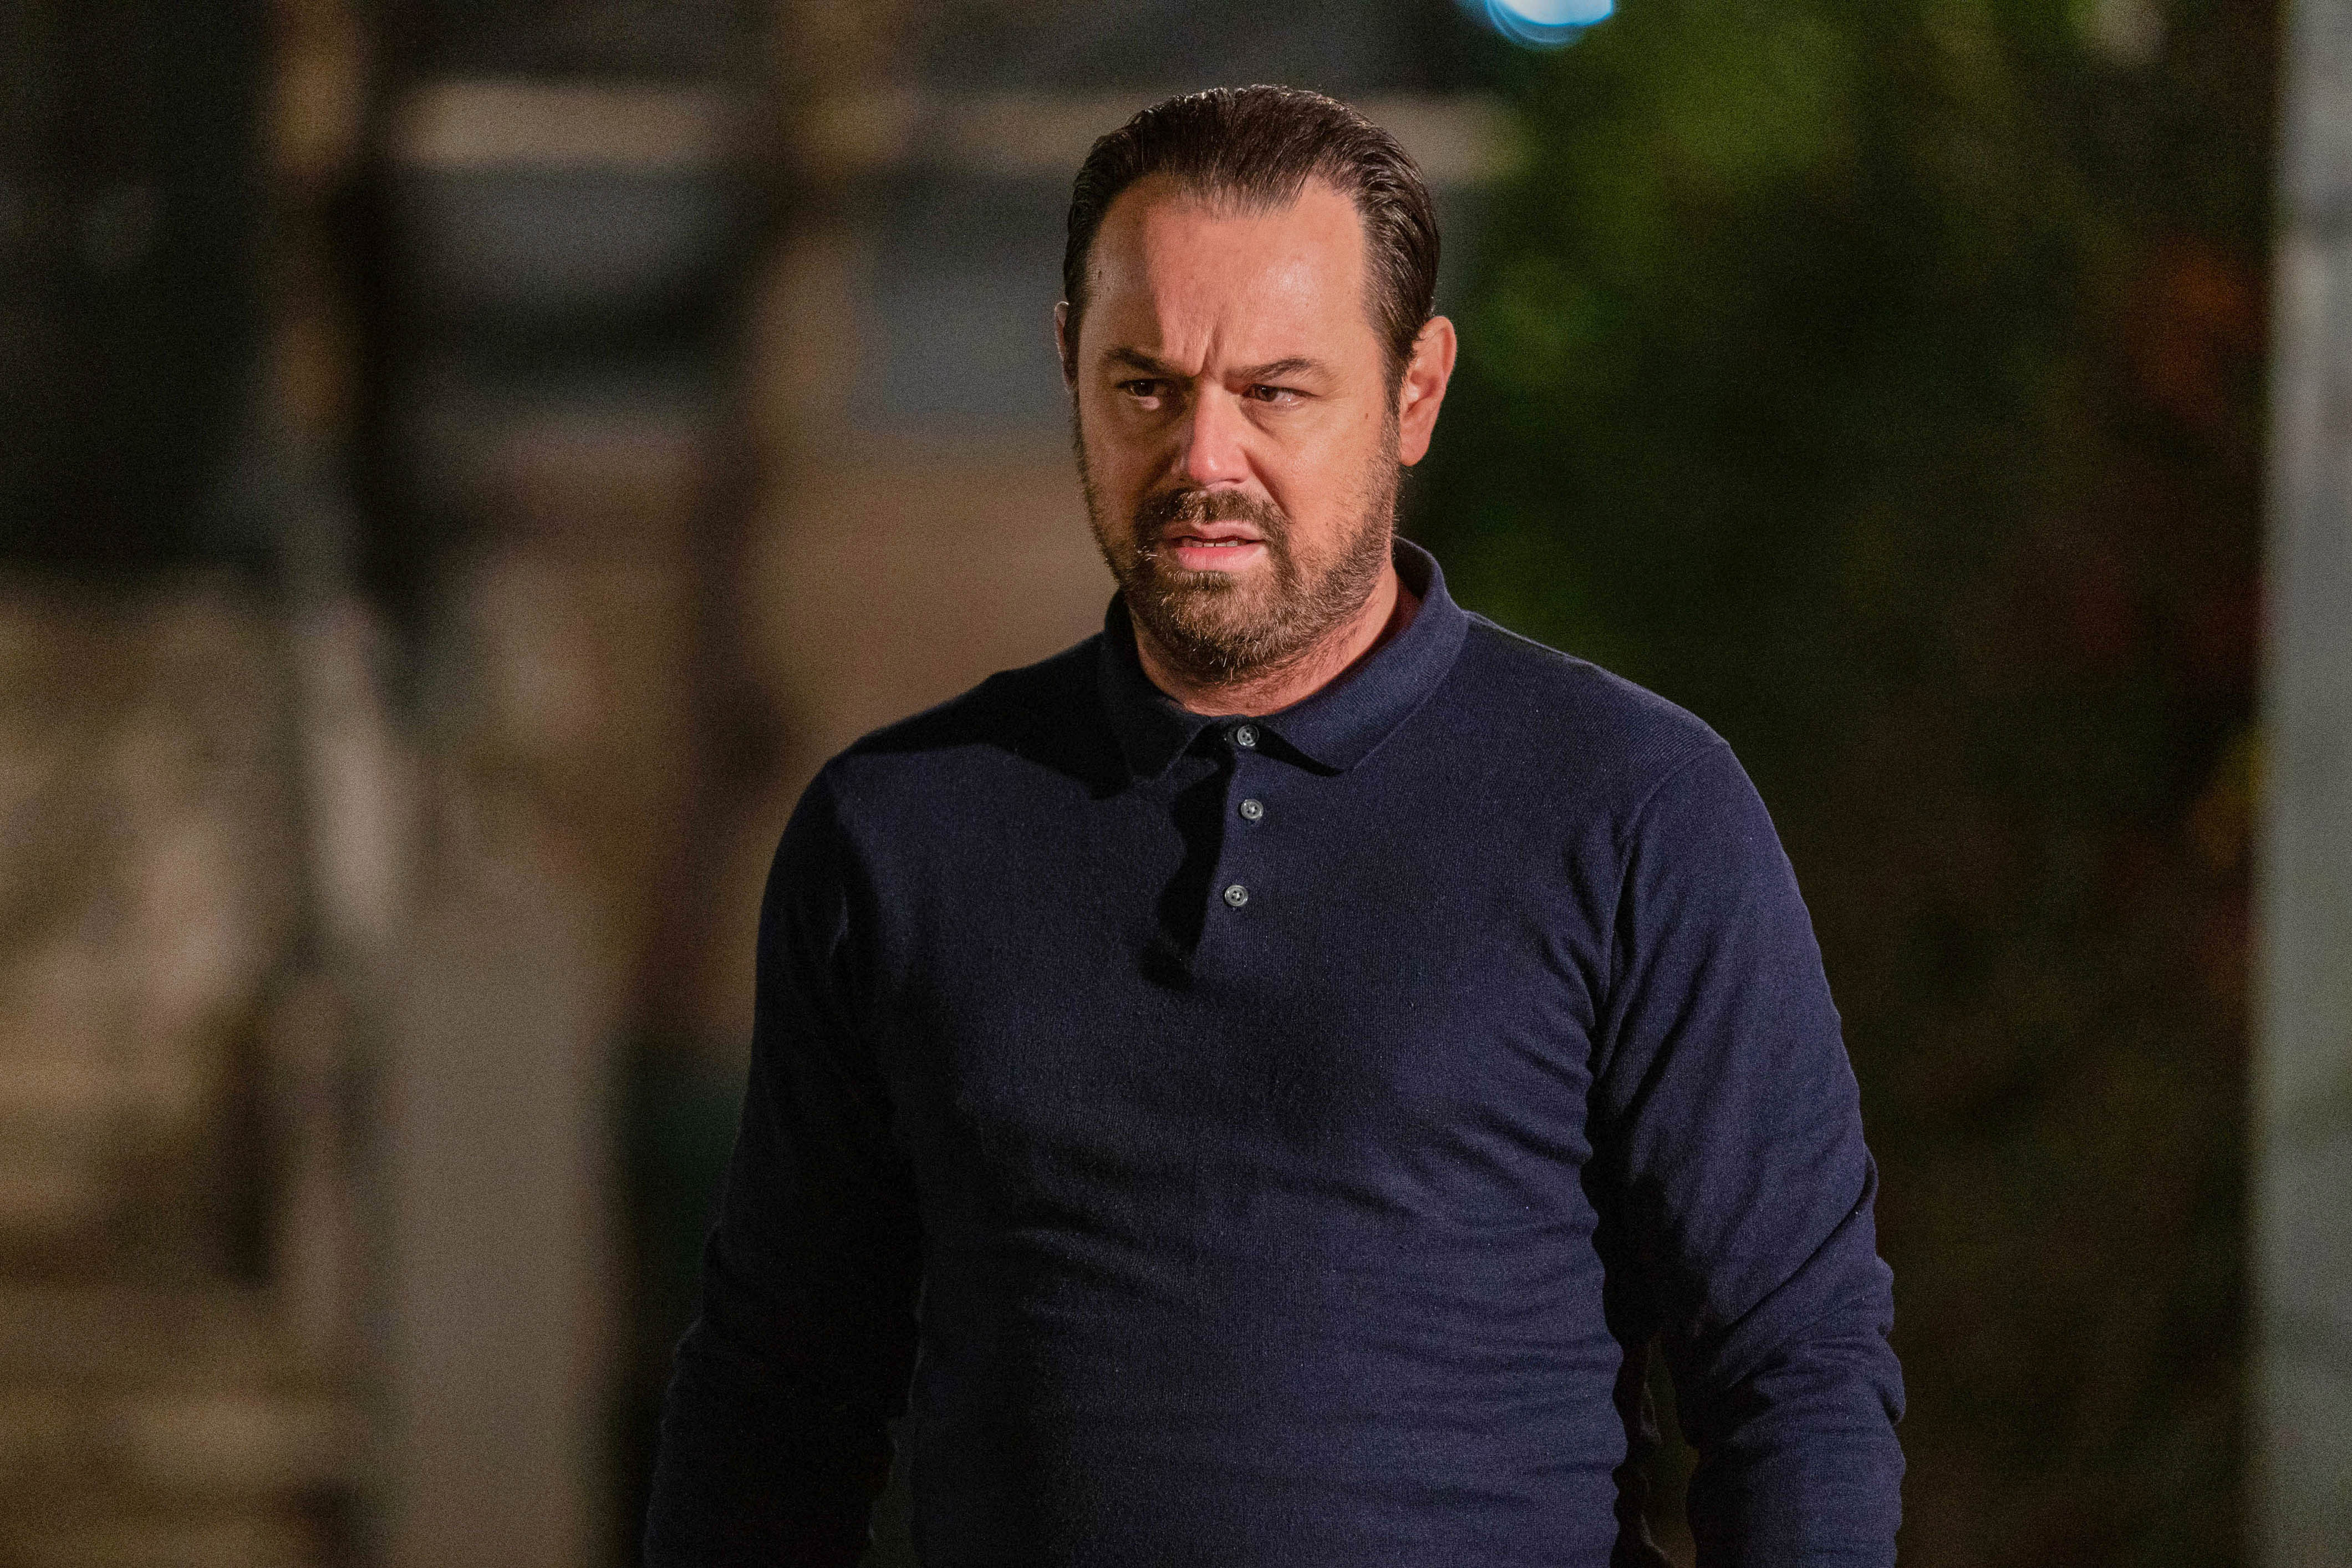 EastEnders spoilers: Mick Carter exposes Sharon Beale and Phil Mitchell as Ian’s attackers